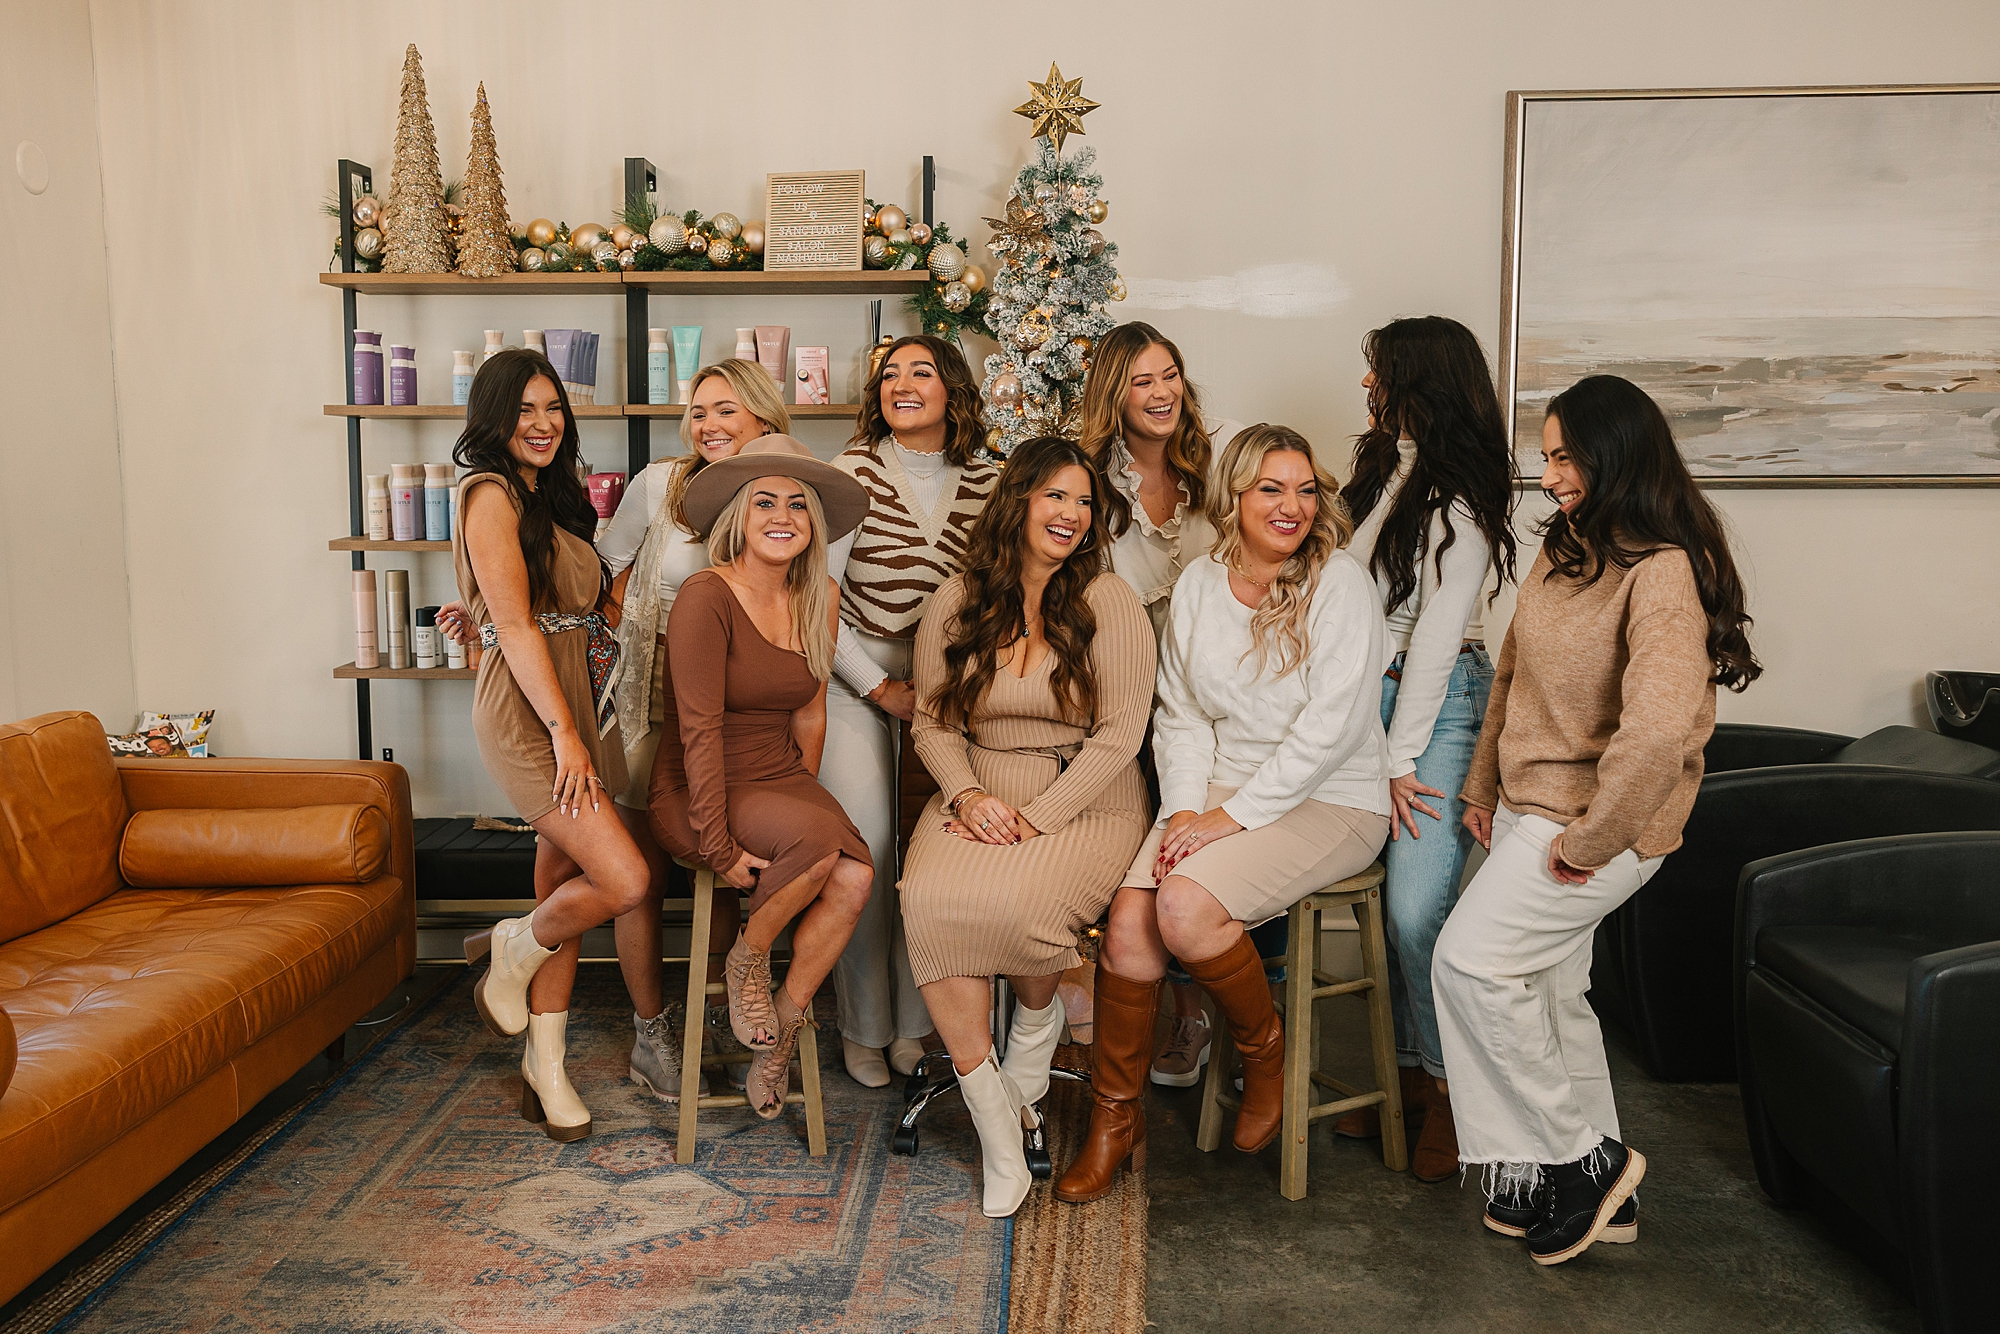 team of stylists sit and stand together by Christmas tree for seasonal branding photos